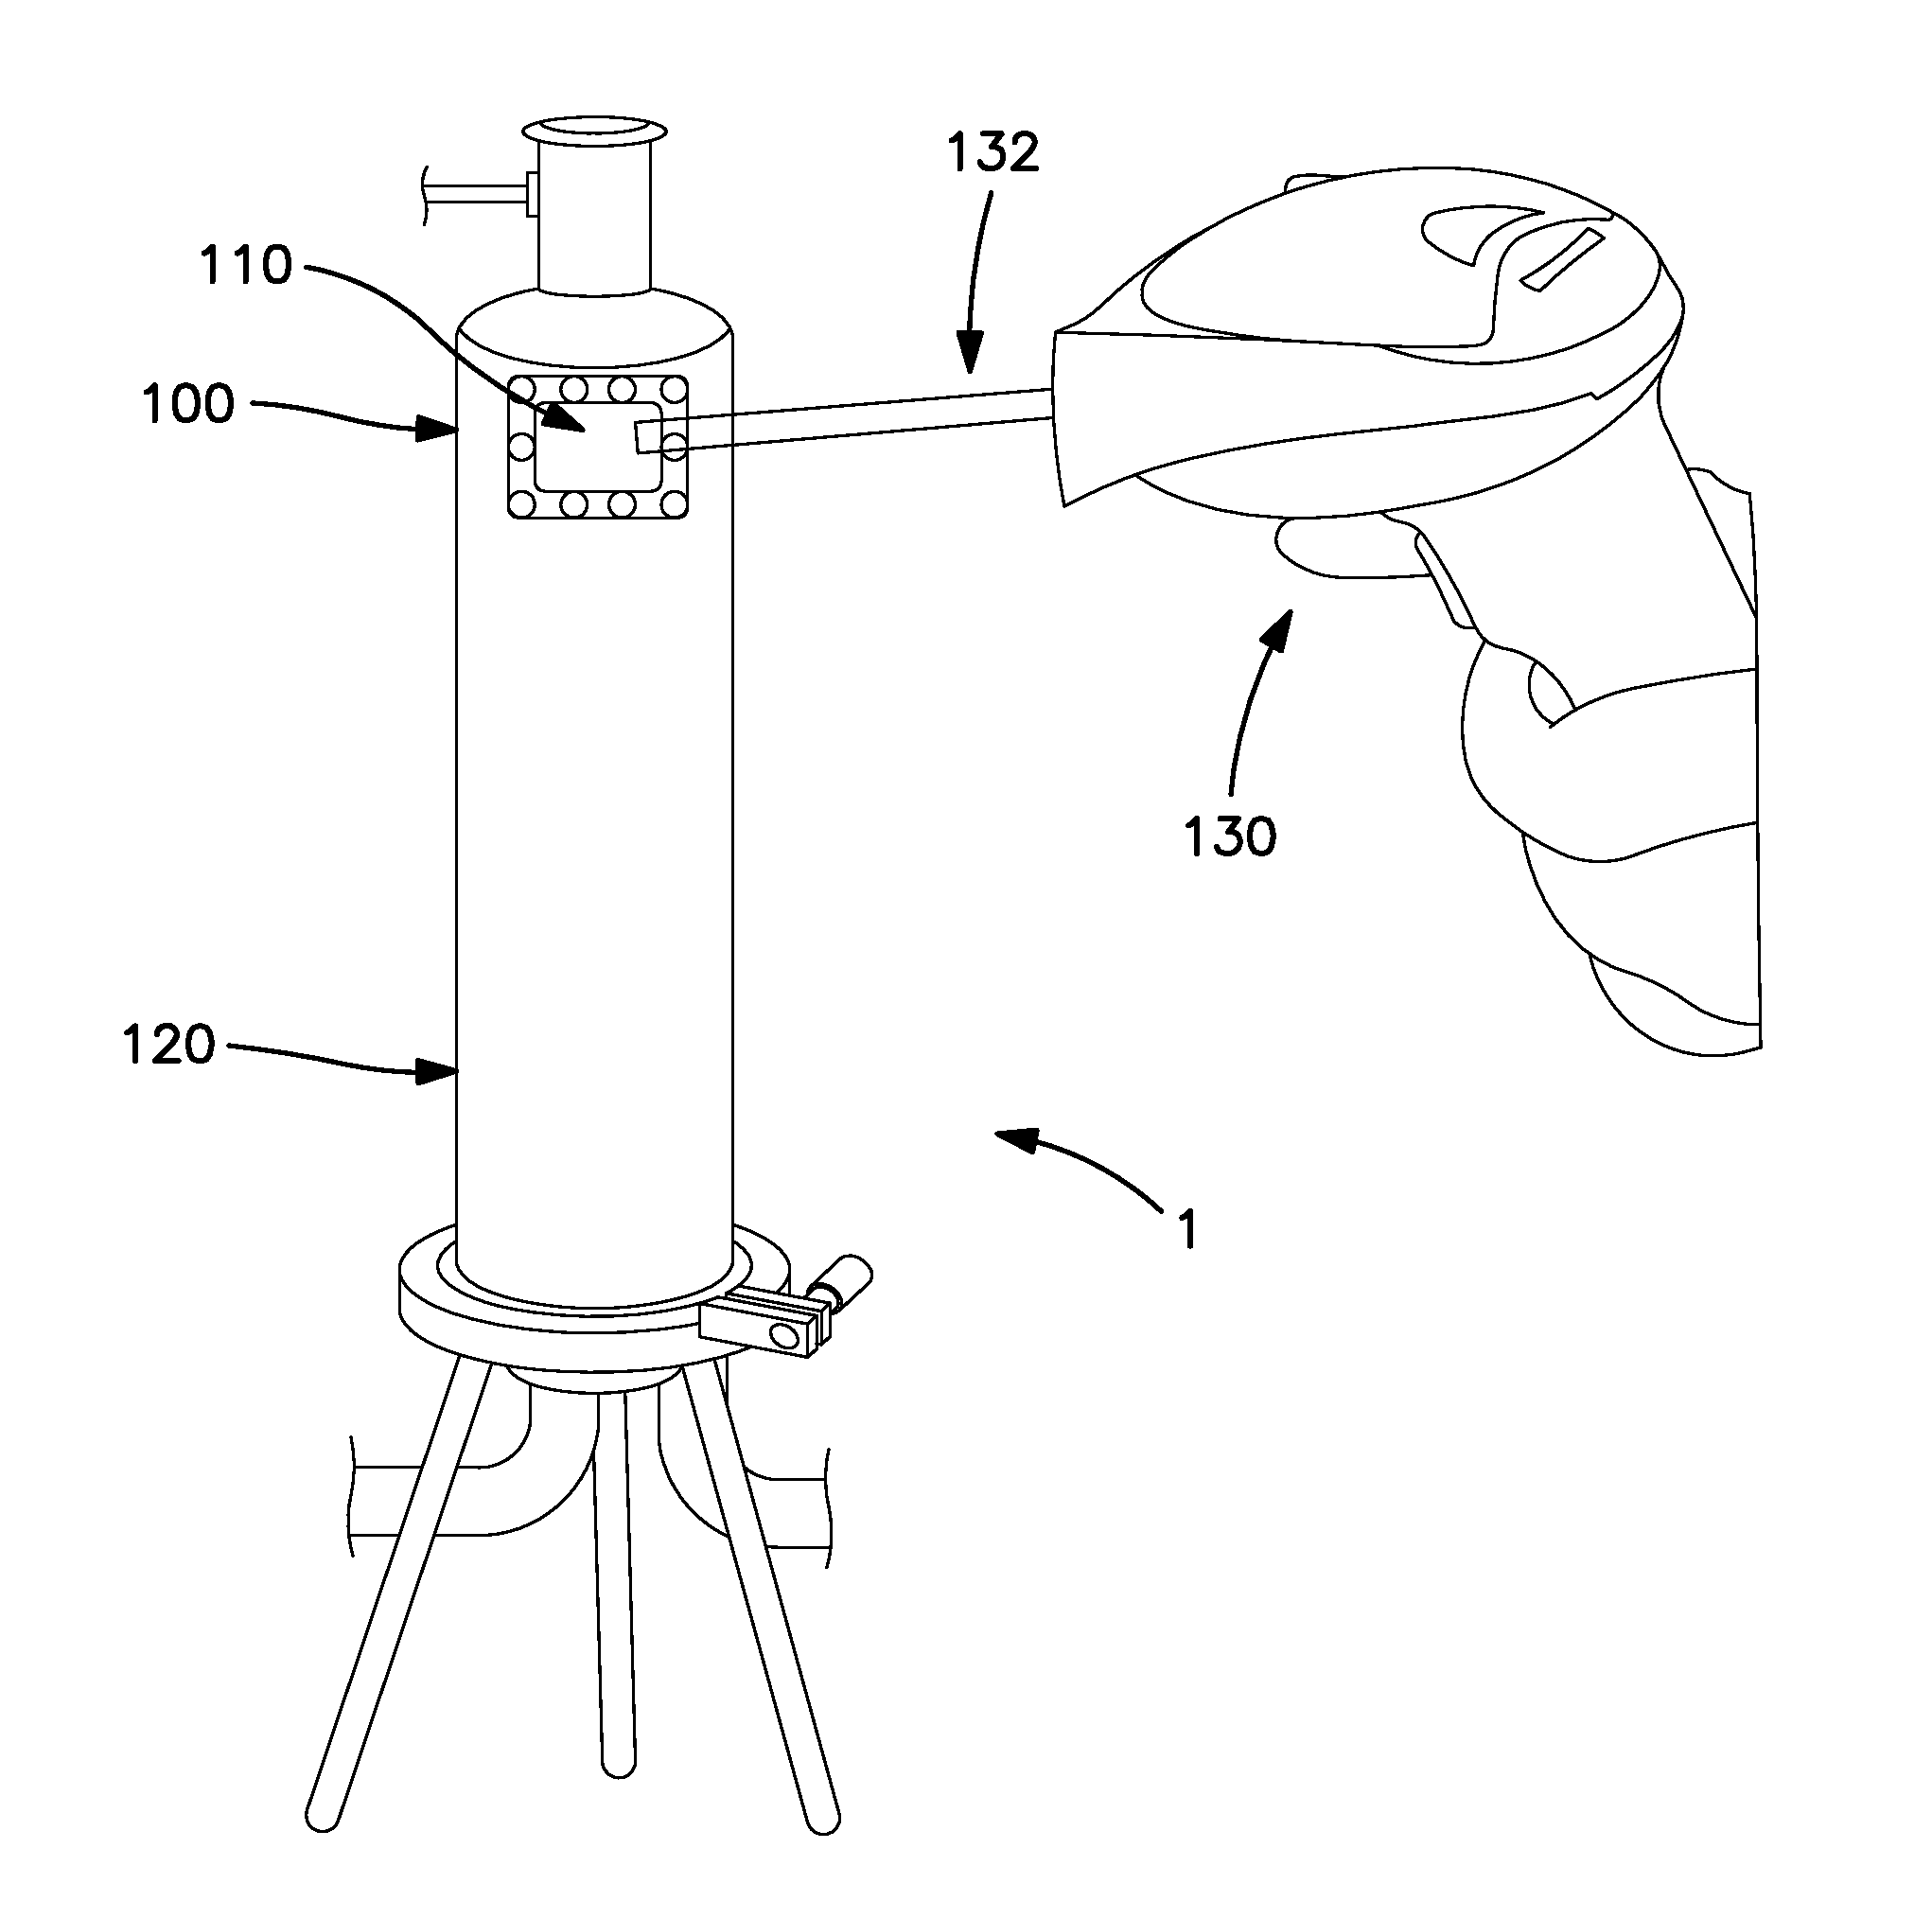 Filter element attachment, filter cartridge, and filter system